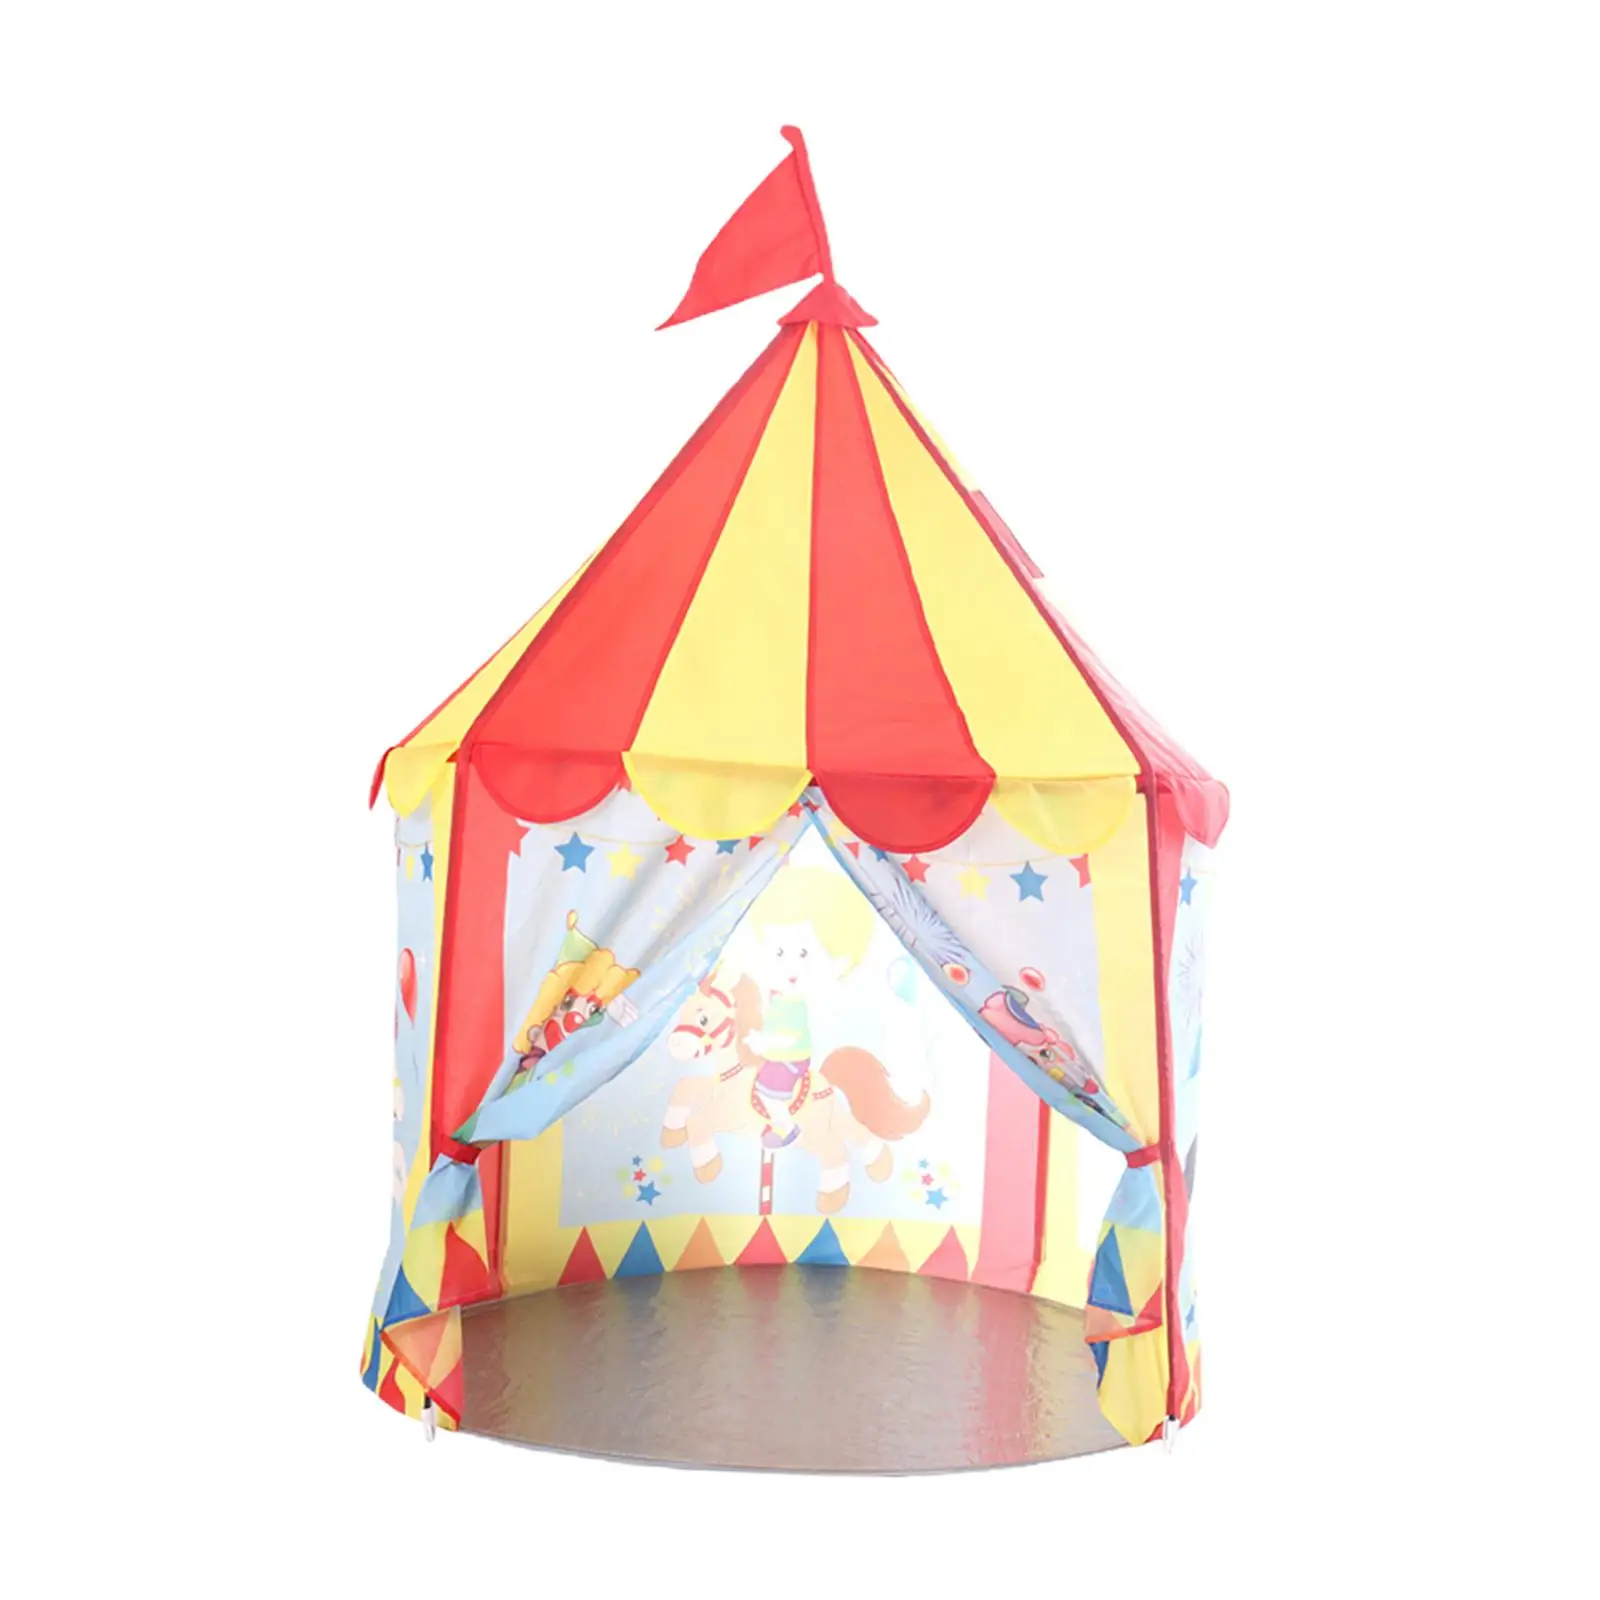 Play Tent House for Kids Portable Indoor Outdoor Tent Best Gift Kids Playhouse Play Teepee for Games Camping Yard Kids